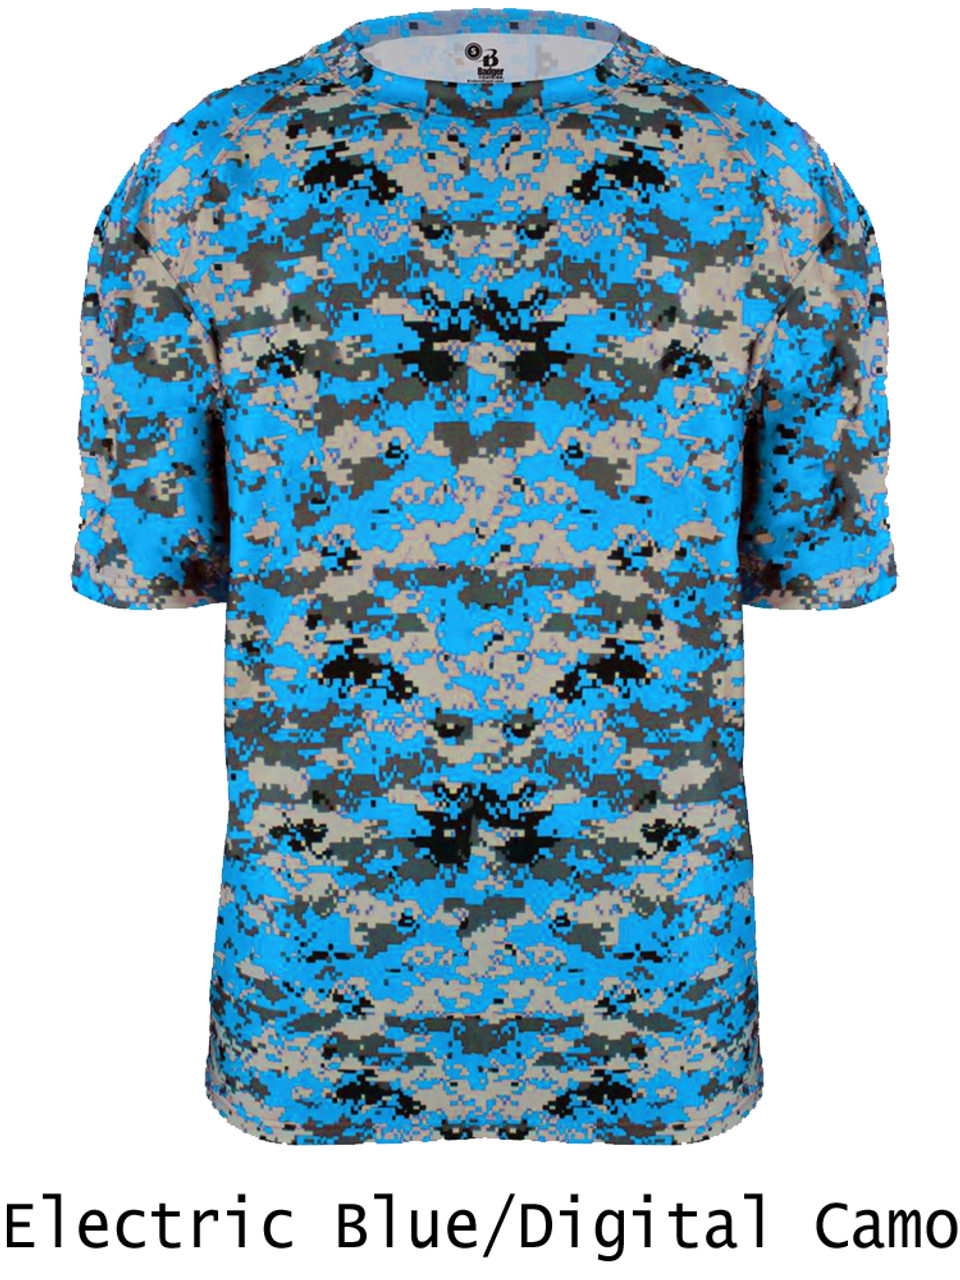 Buy New Adult Sublimated Digital Camo Baseball Jersey by Teamwork